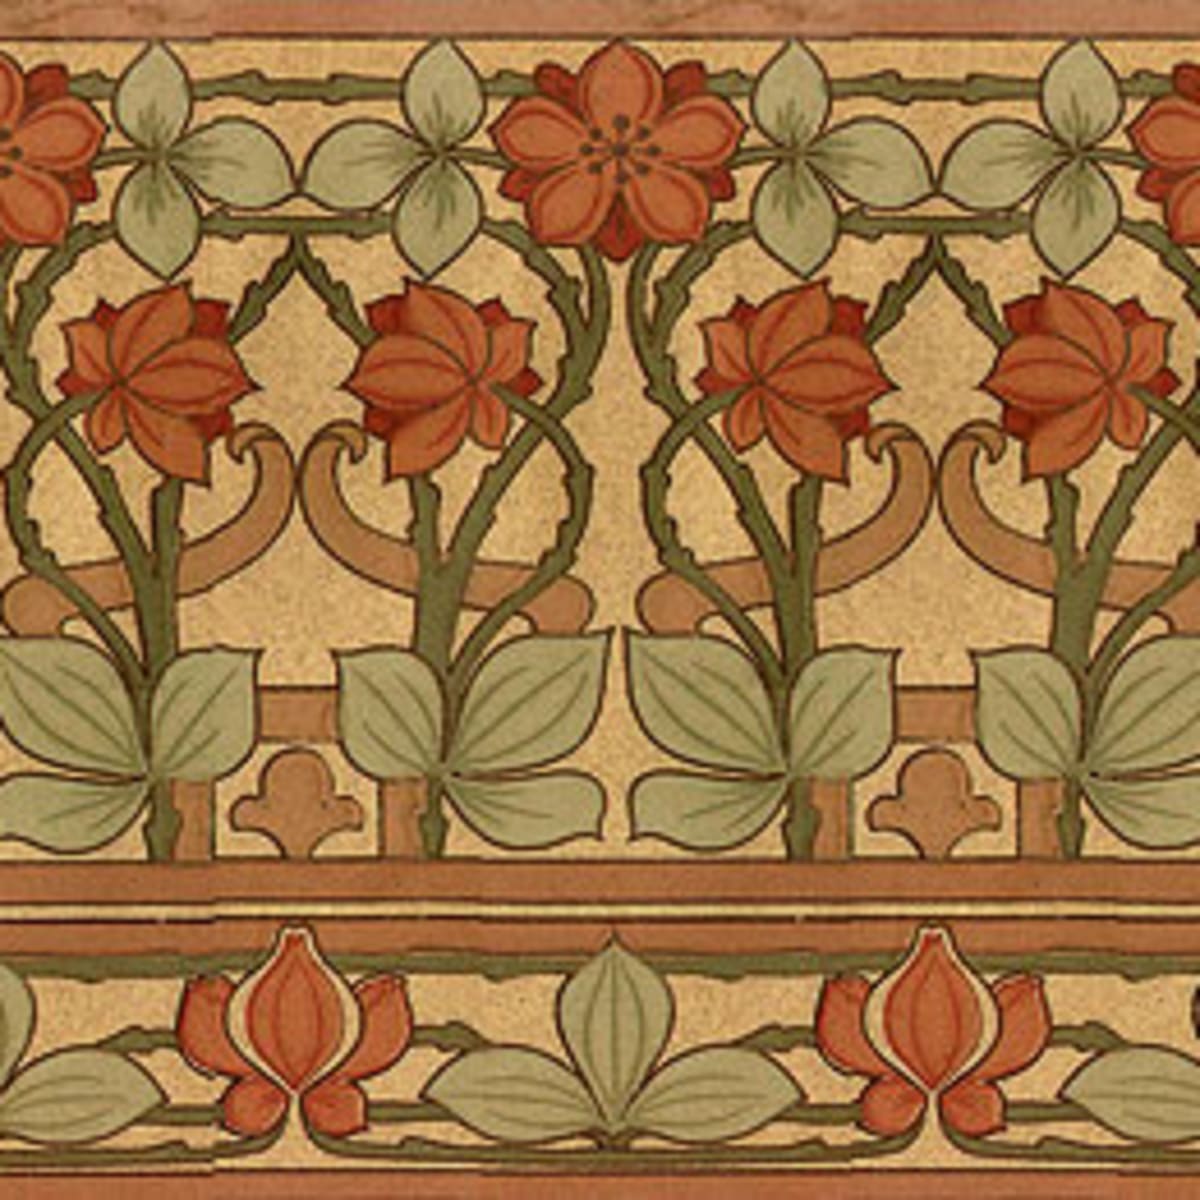 Arts & Crafts Revival Wallpaper and Paint Products - Design for the Arts &  Crafts House | Arts & Crafts Homes Online